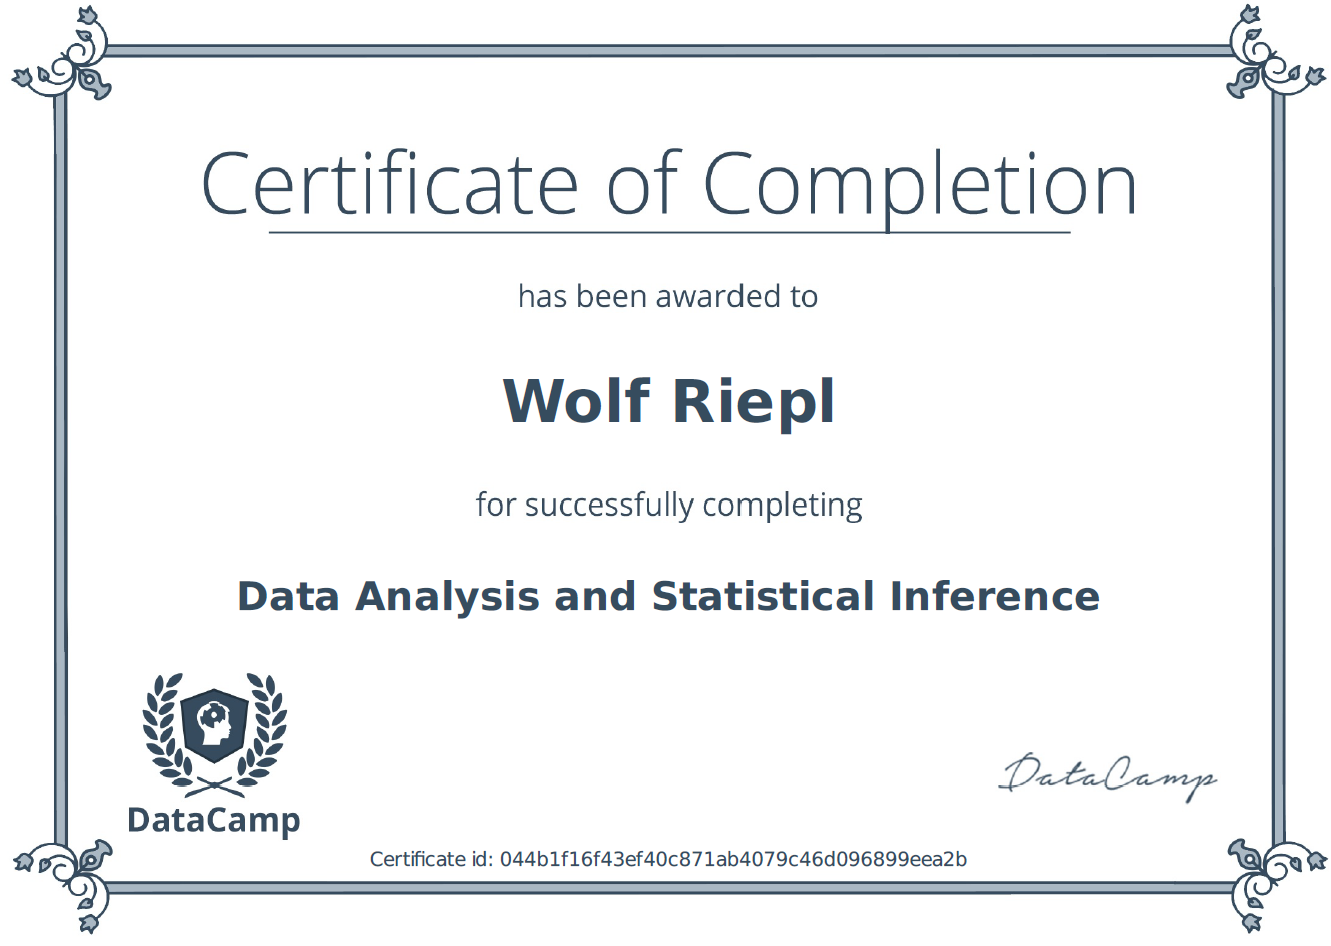 Data Analysis and Statistical Inference